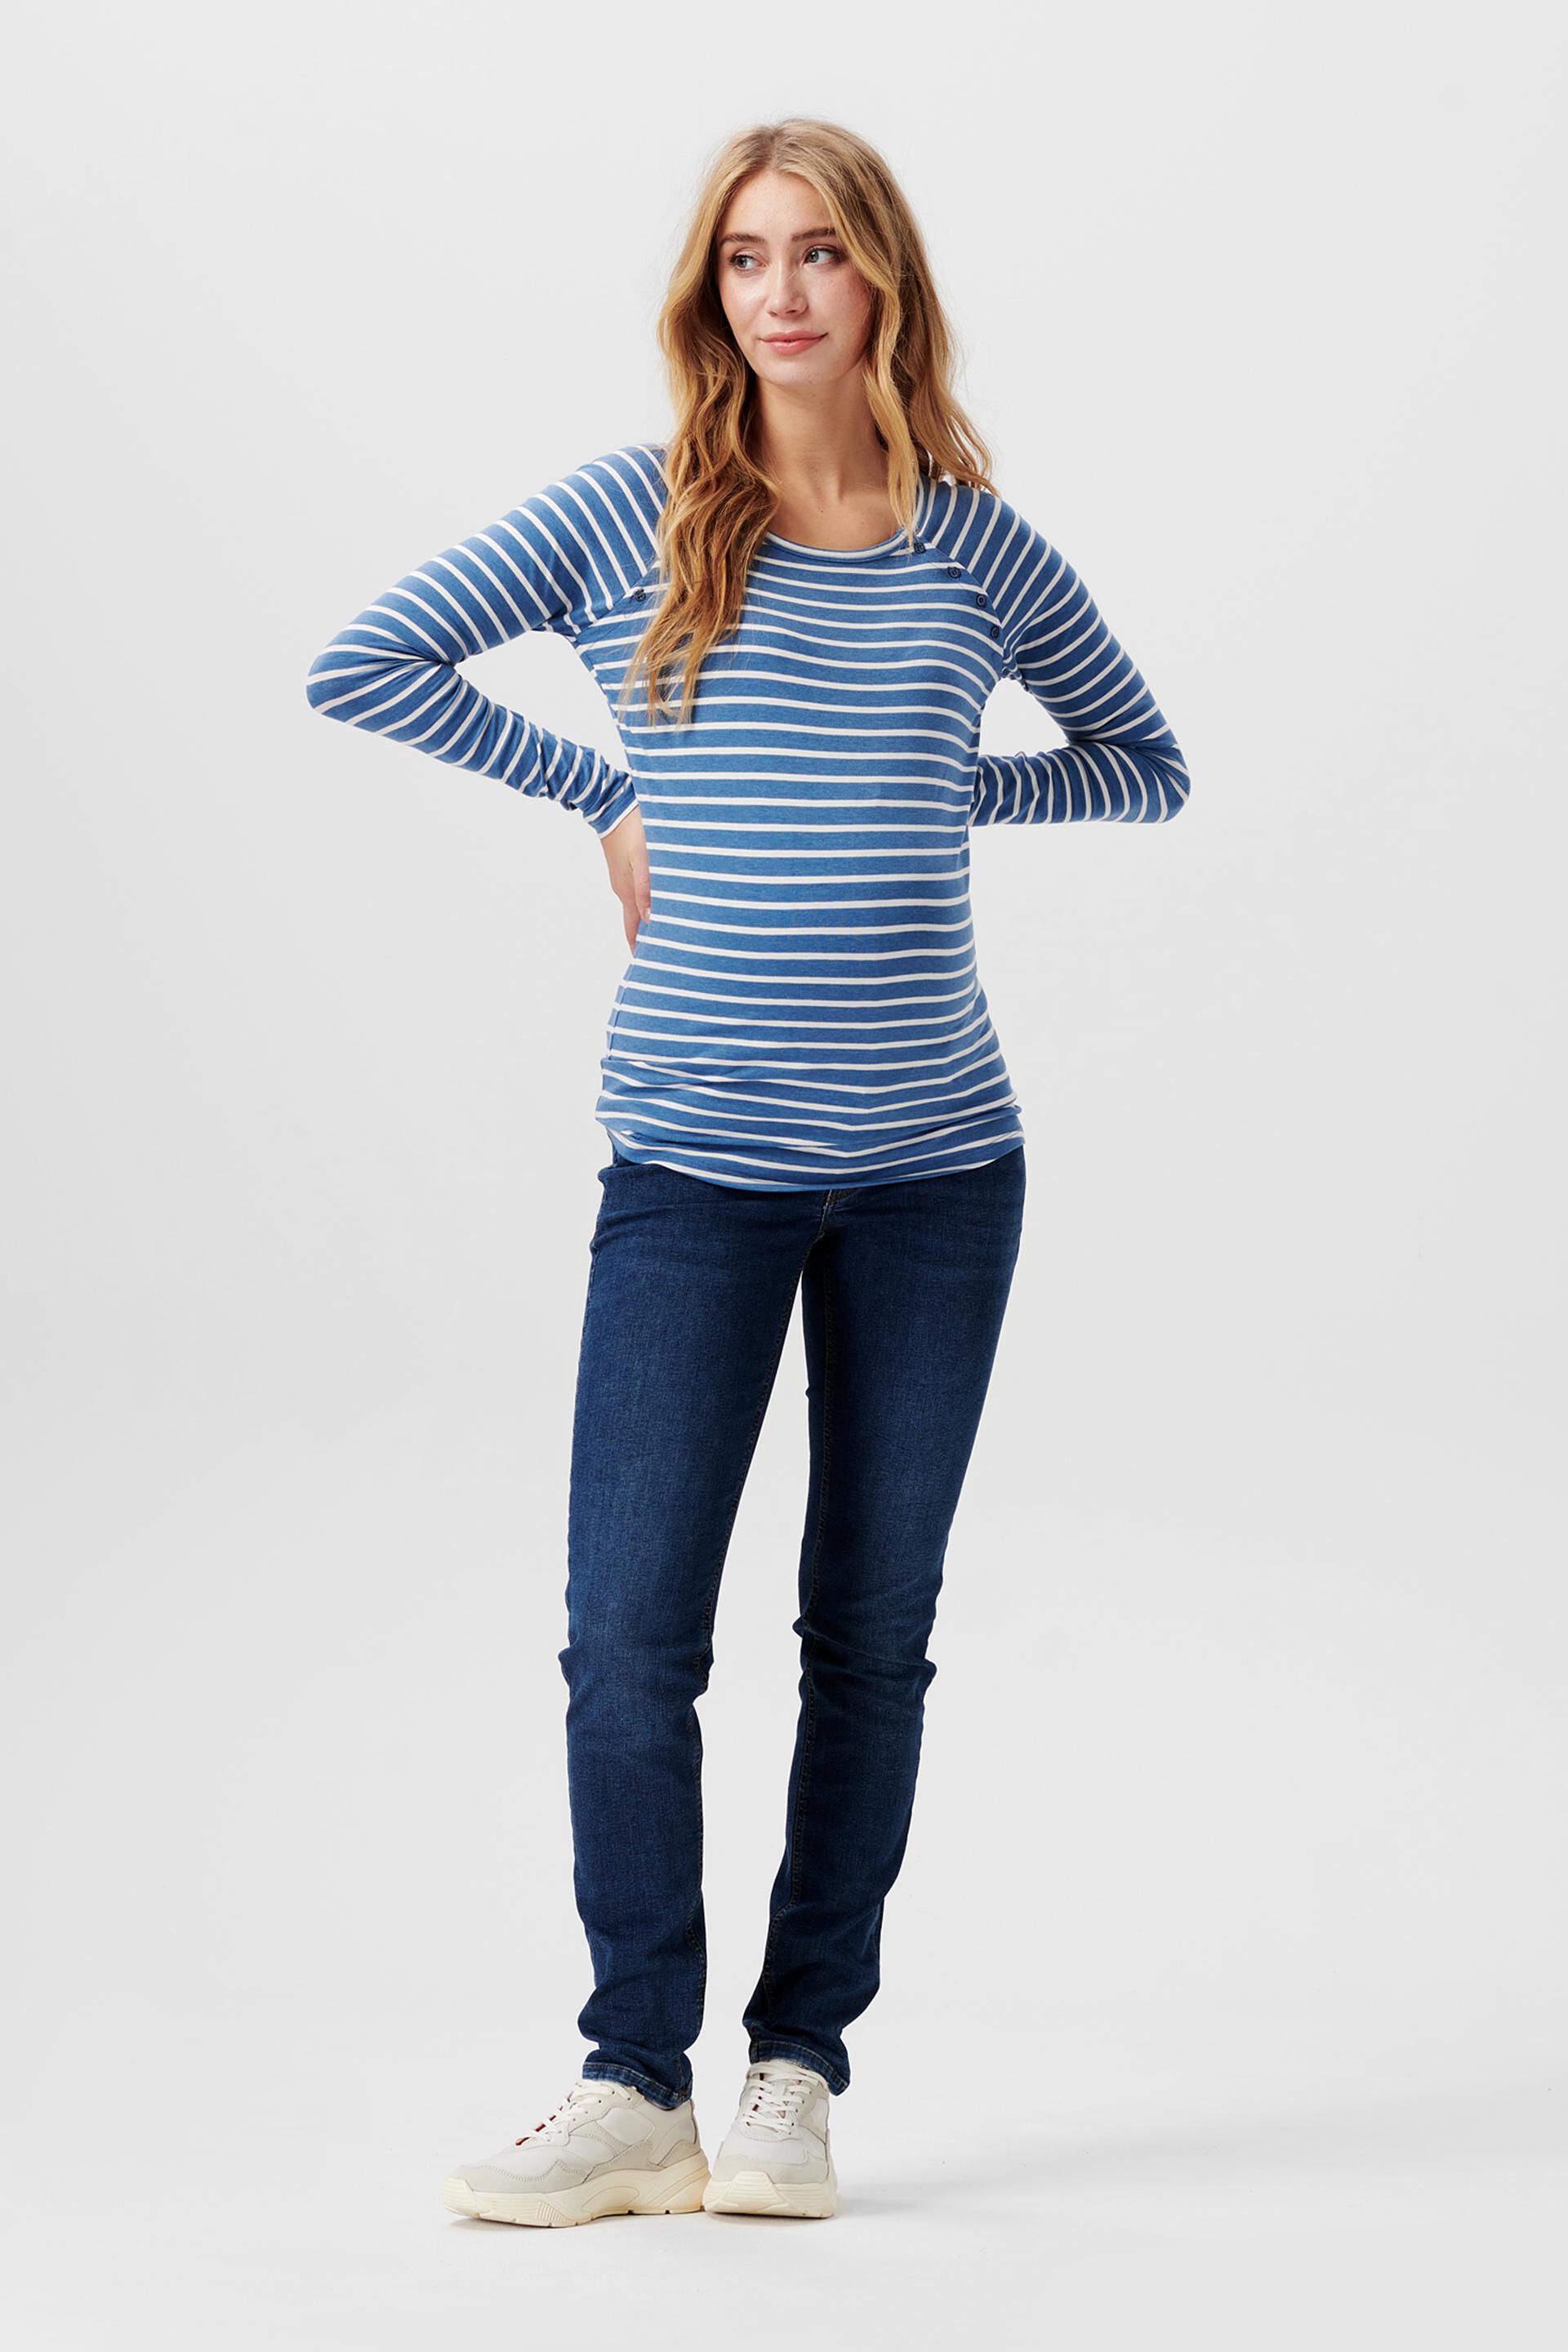 Esprit Striped organic cotton long-sleeved top,